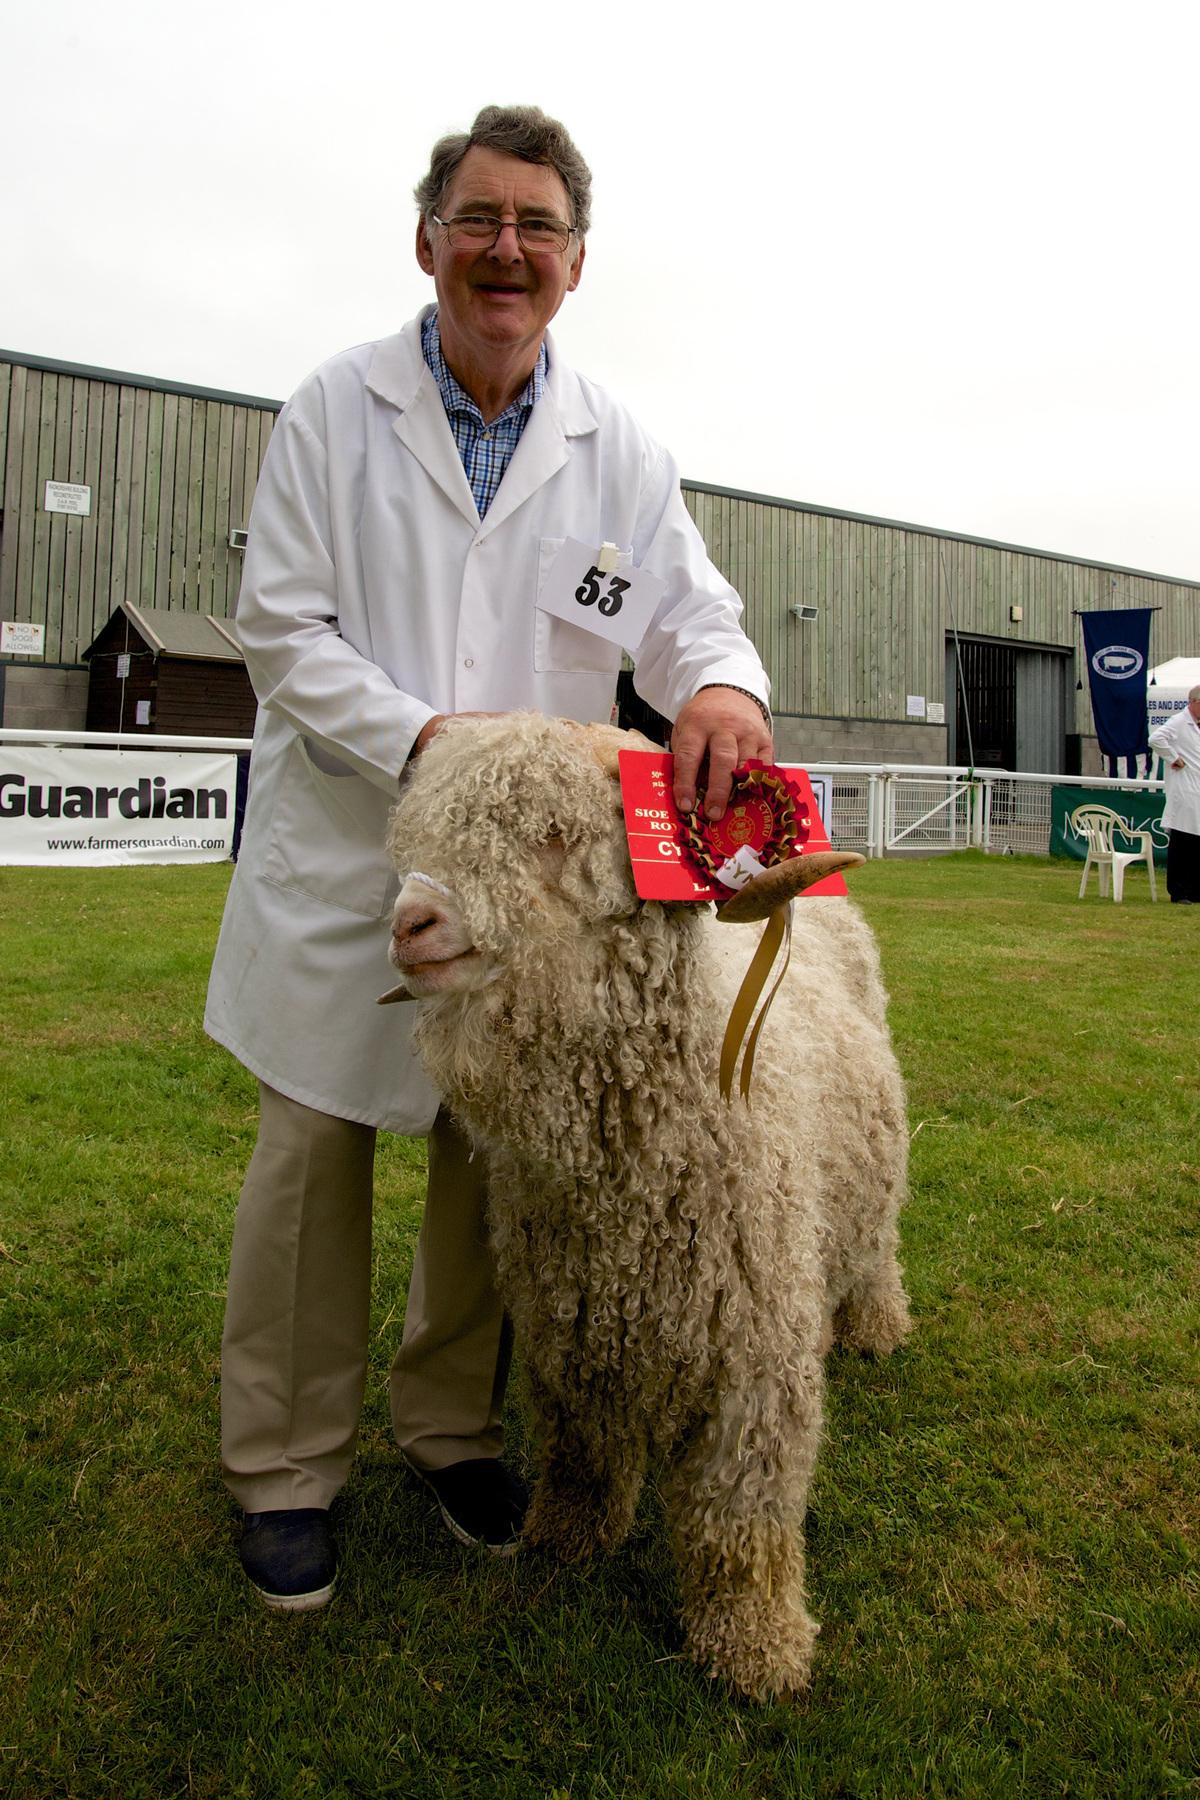 The 2013 Royal Welsh Show was a huge success, with thousands of top class exhibits competing for the top prizes.